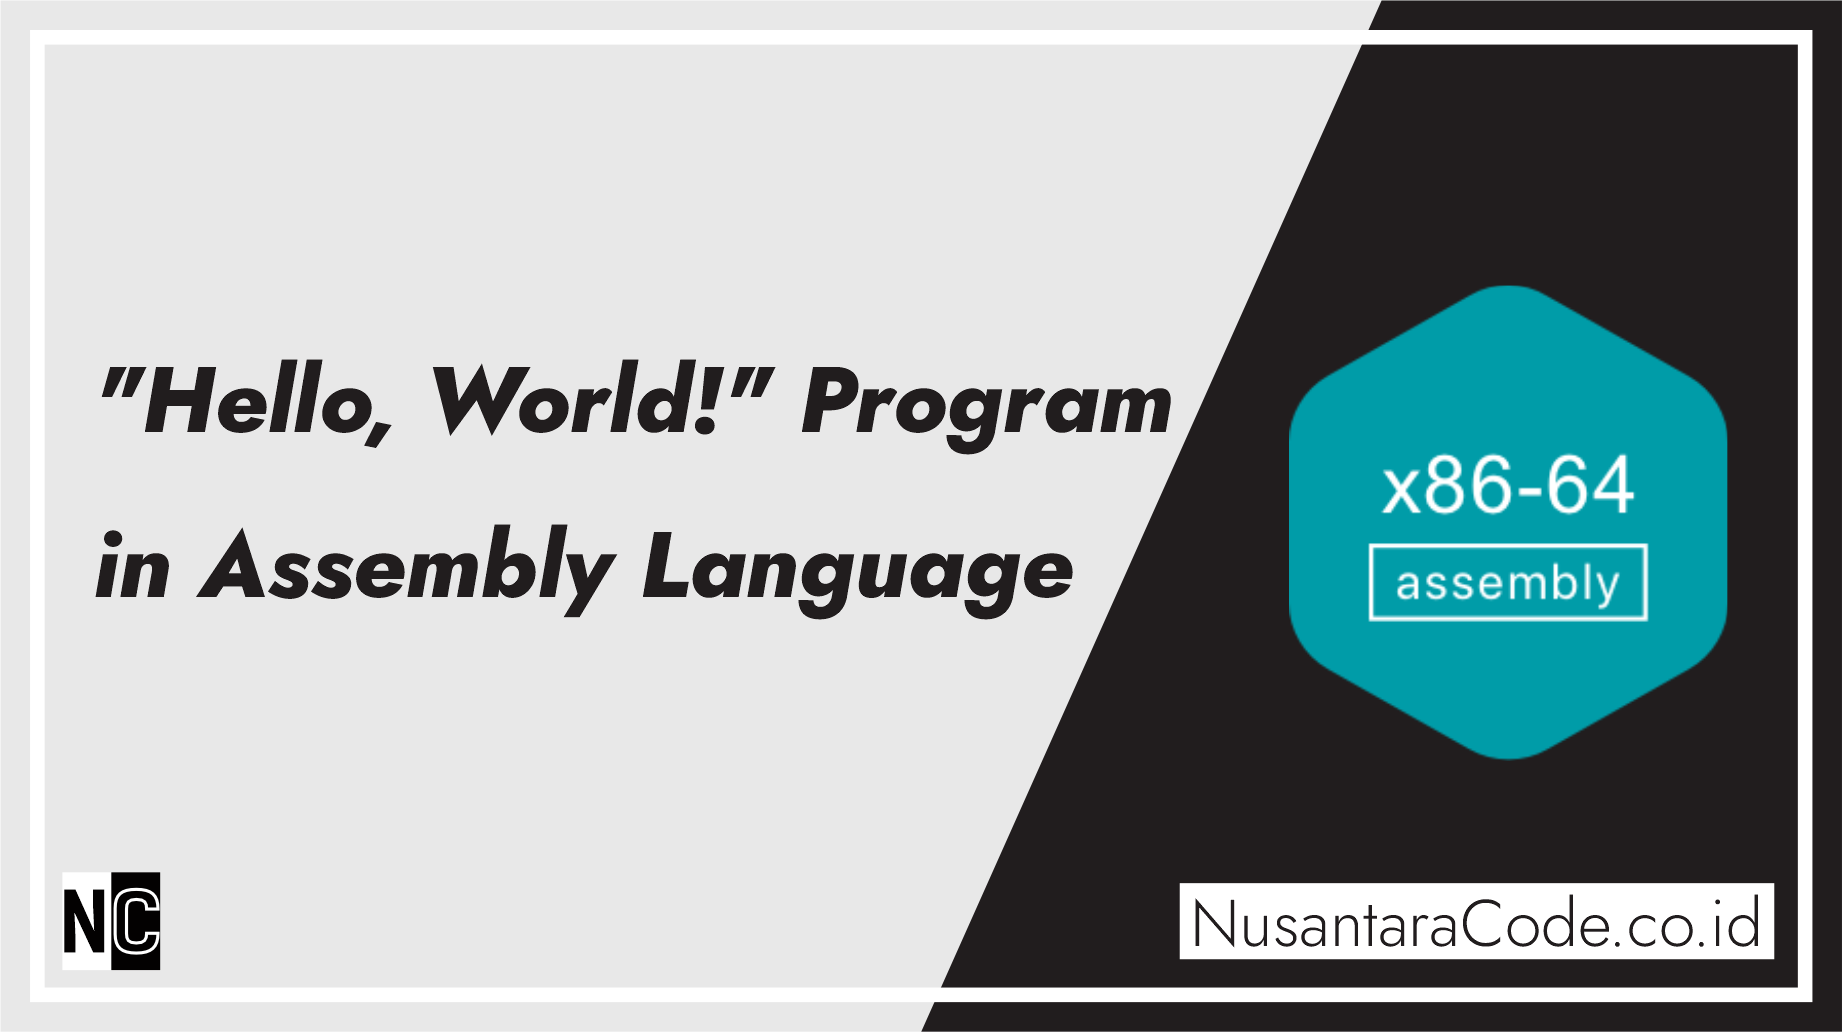 Building Your First “Hello, World!” Program in Assembly Language